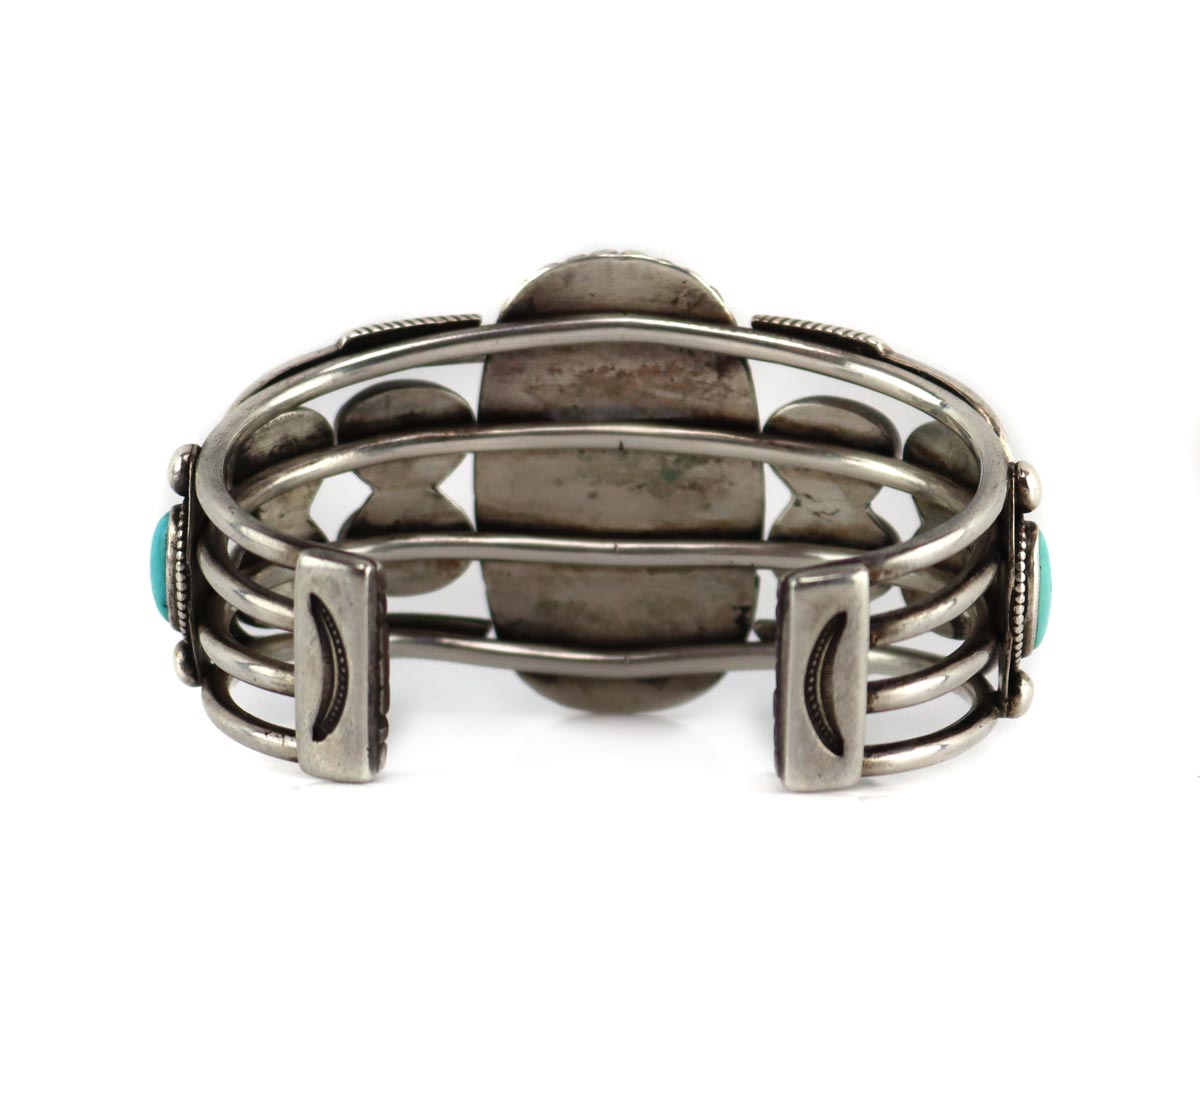 Navajo - Turquoise and Silver Bracelet with Arrow Design c. 1920-30s, size 7.25